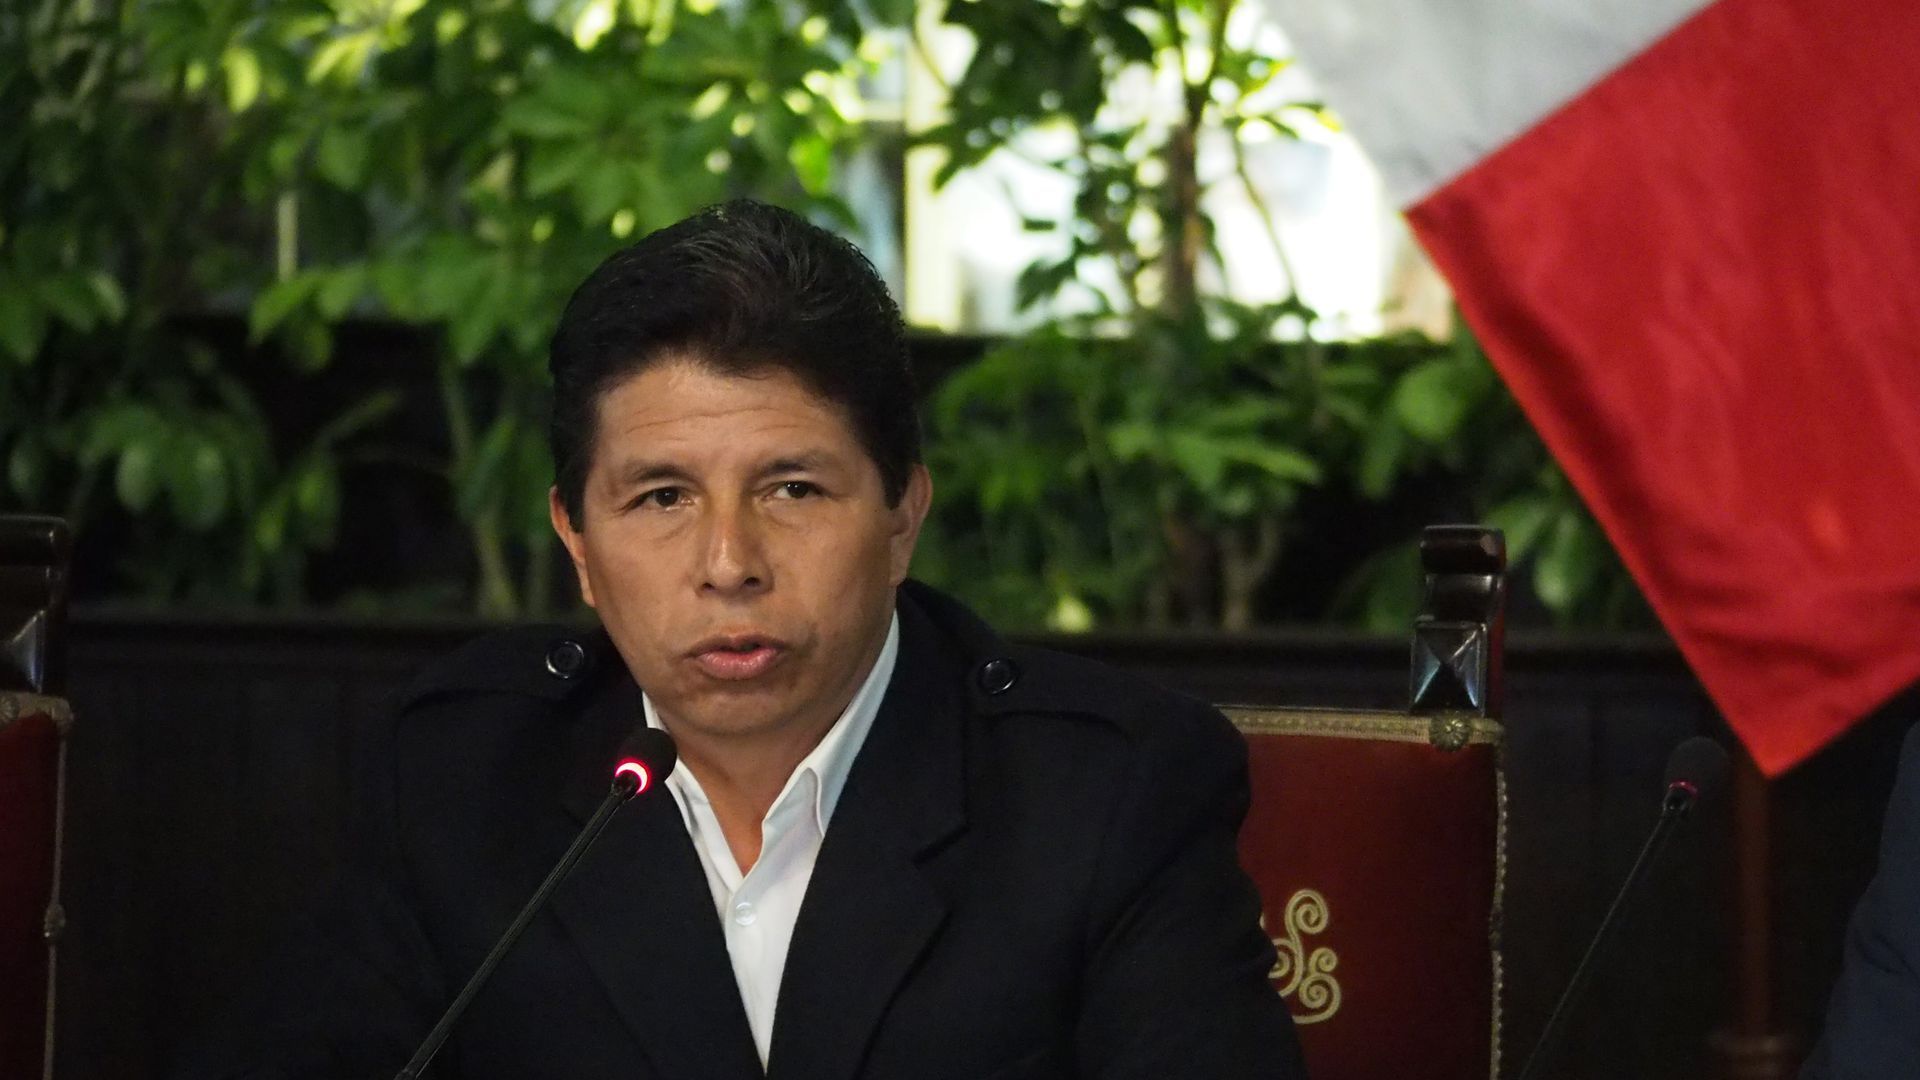 Peruvian President Pedro Castillo sits with a small microphone in front of him 